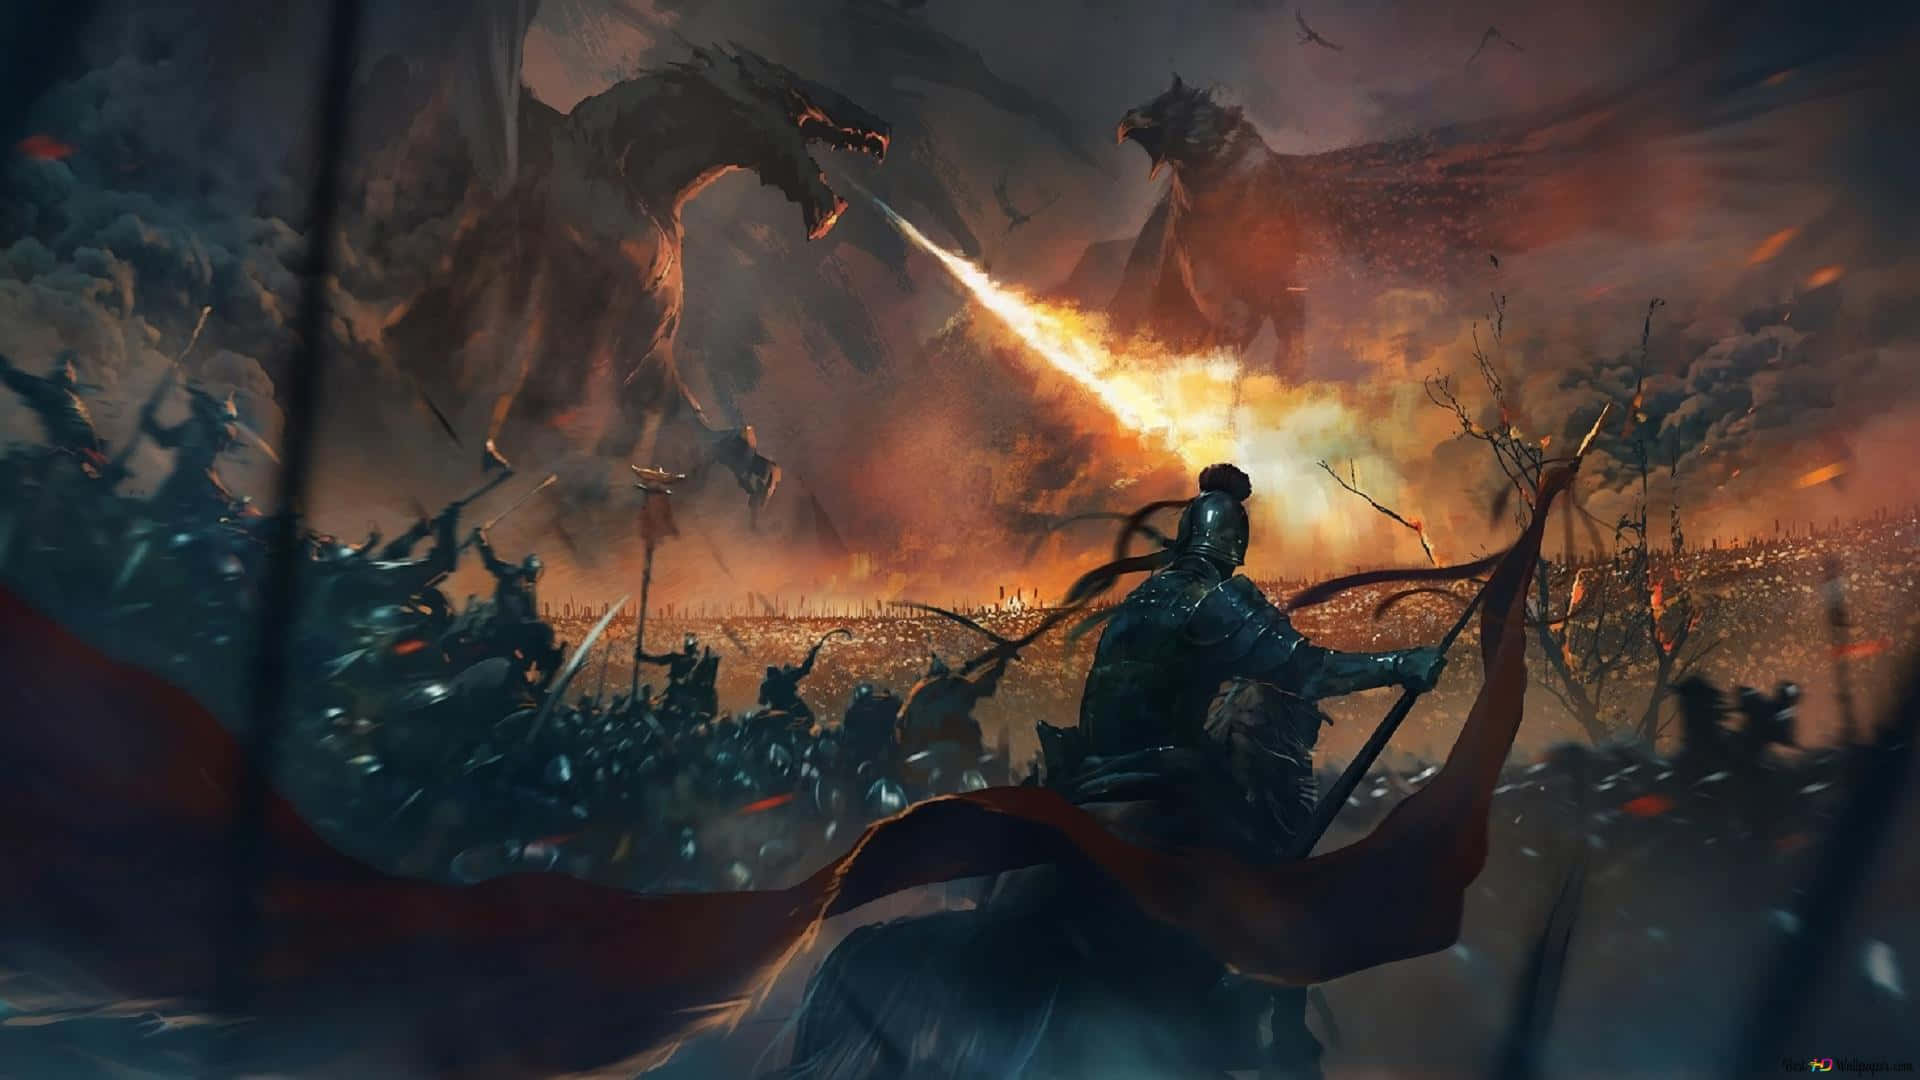 Two armies clash on a battlefield in an incredible and epic battle Wallpaper